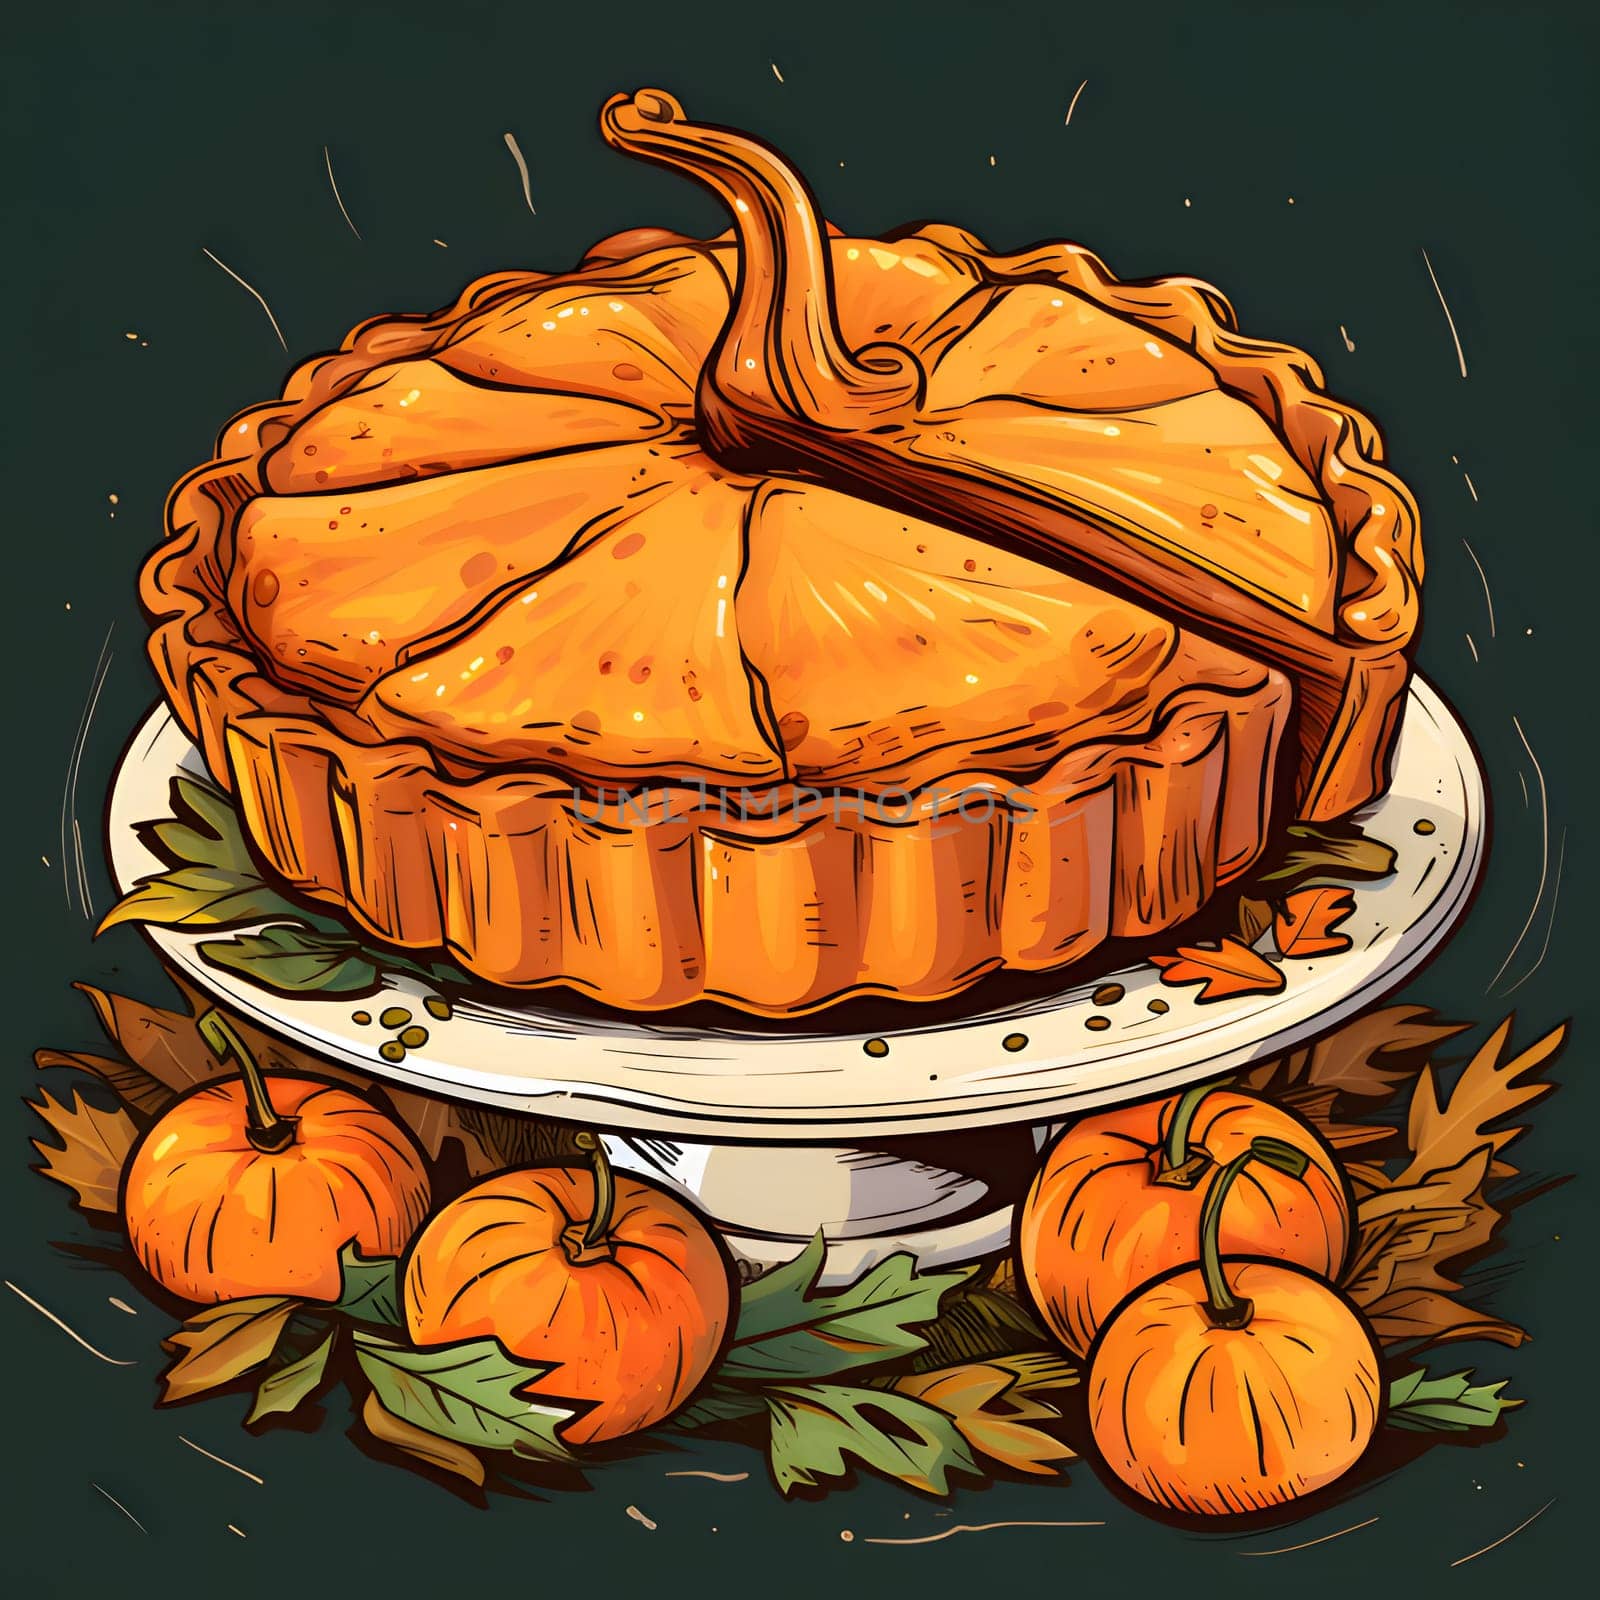 Illustration of pumpkin pie on a stand, under it tiny orange pumpkins and leaves dark isolated background. Pumpkin as a dish of thanksgiving for the harvest. An atmosphere of joy and celebration.